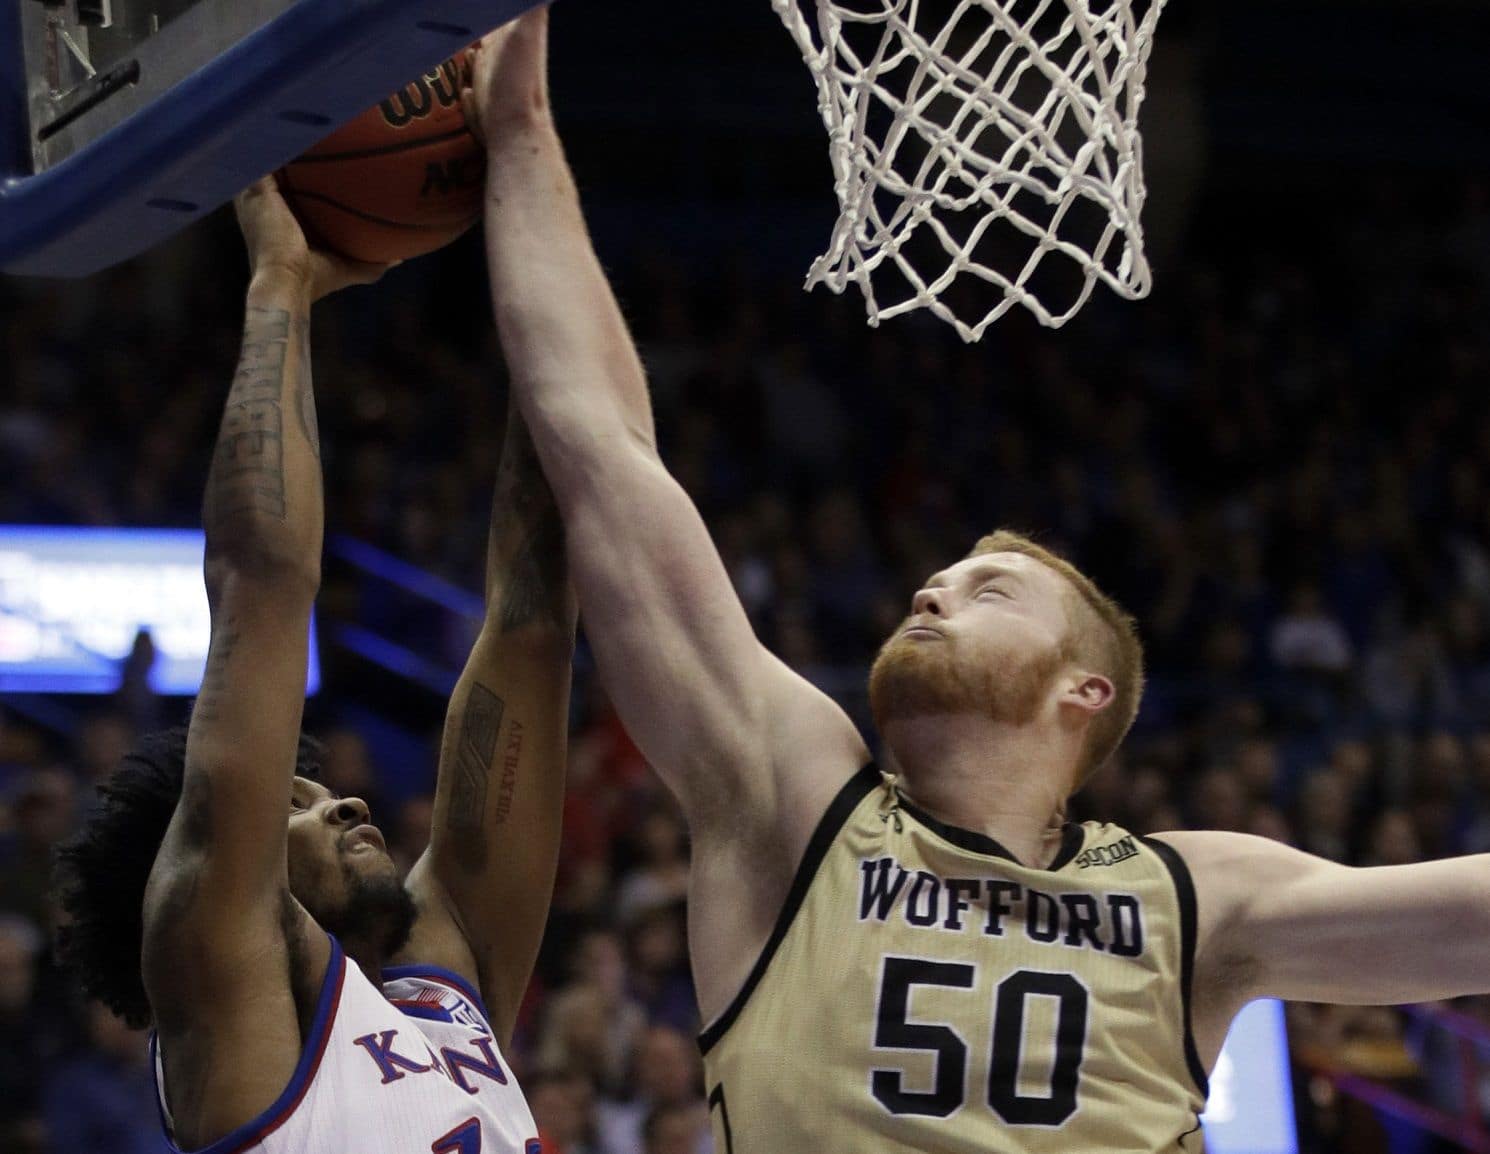 Kansas guard K.J. Lawson (13) is fouled by Wofford center Matthew Pegram (50) during the first half of an NCAA college basketball game in Lawrence, Kan., Tuesday, Dec. 4, 2018. (AP Photo/Orlin Wagner)